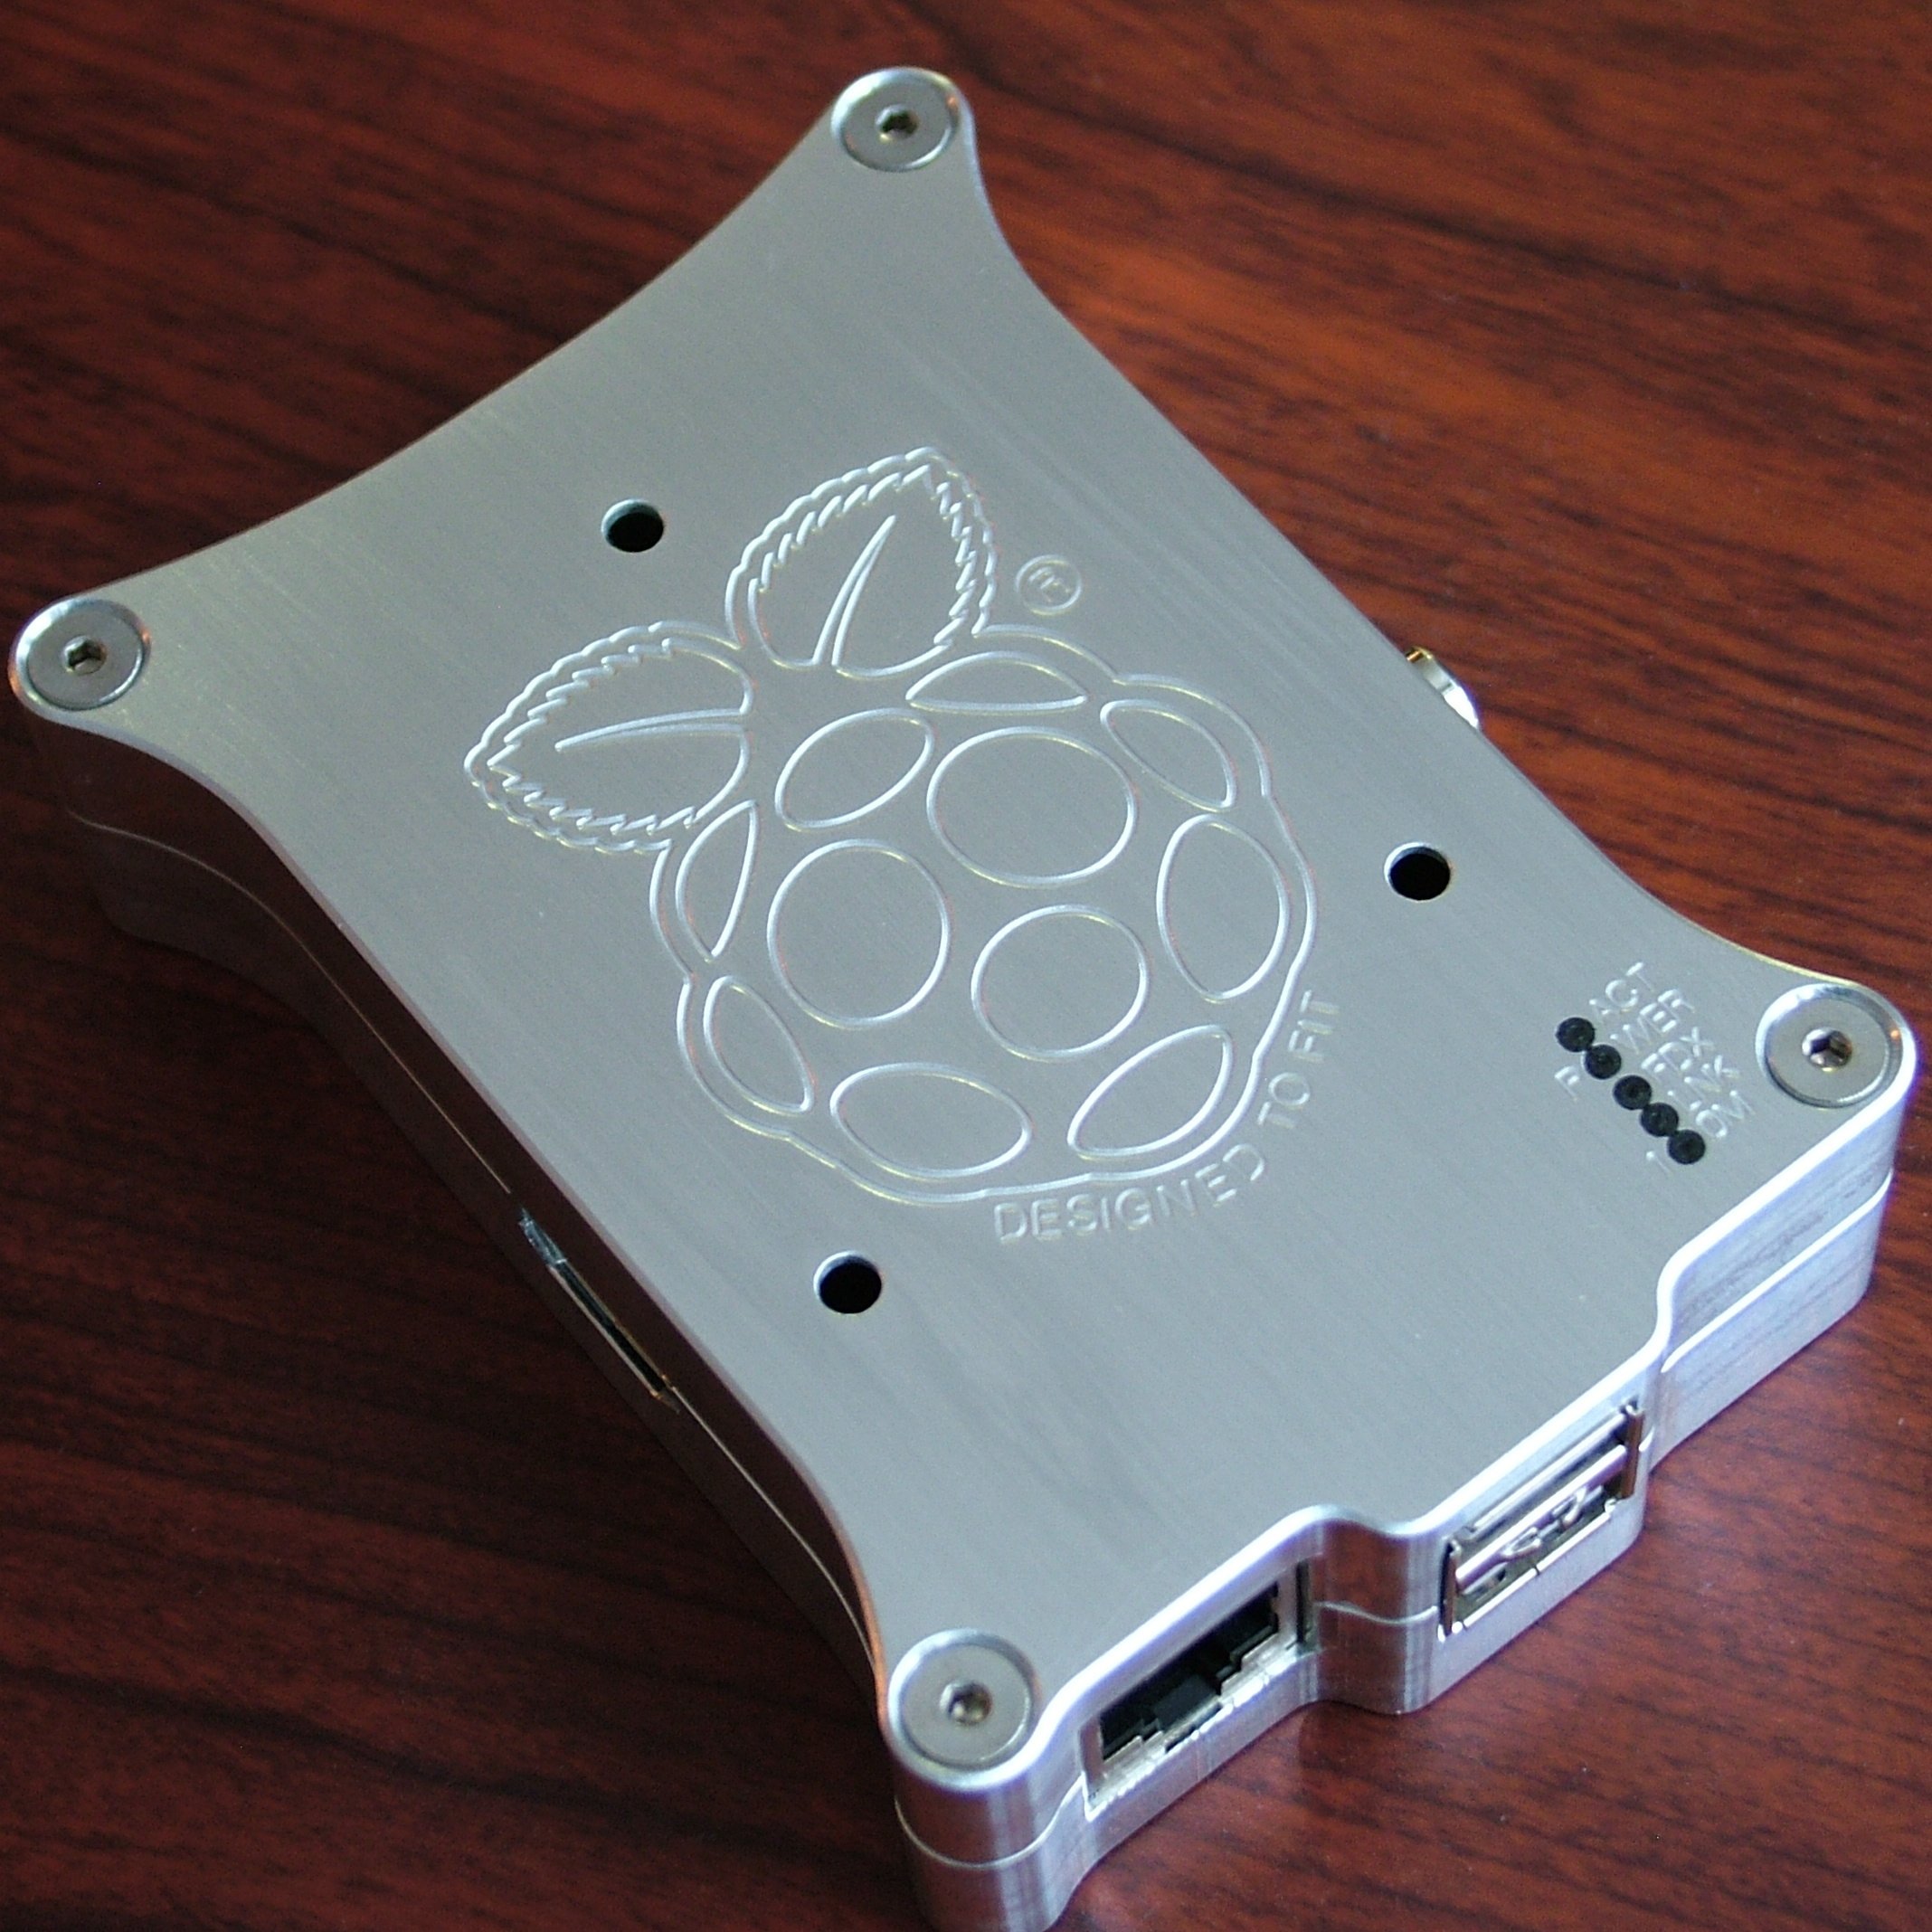 aluminum-raspberry-pi-case-from-cooltr5-on-tindie